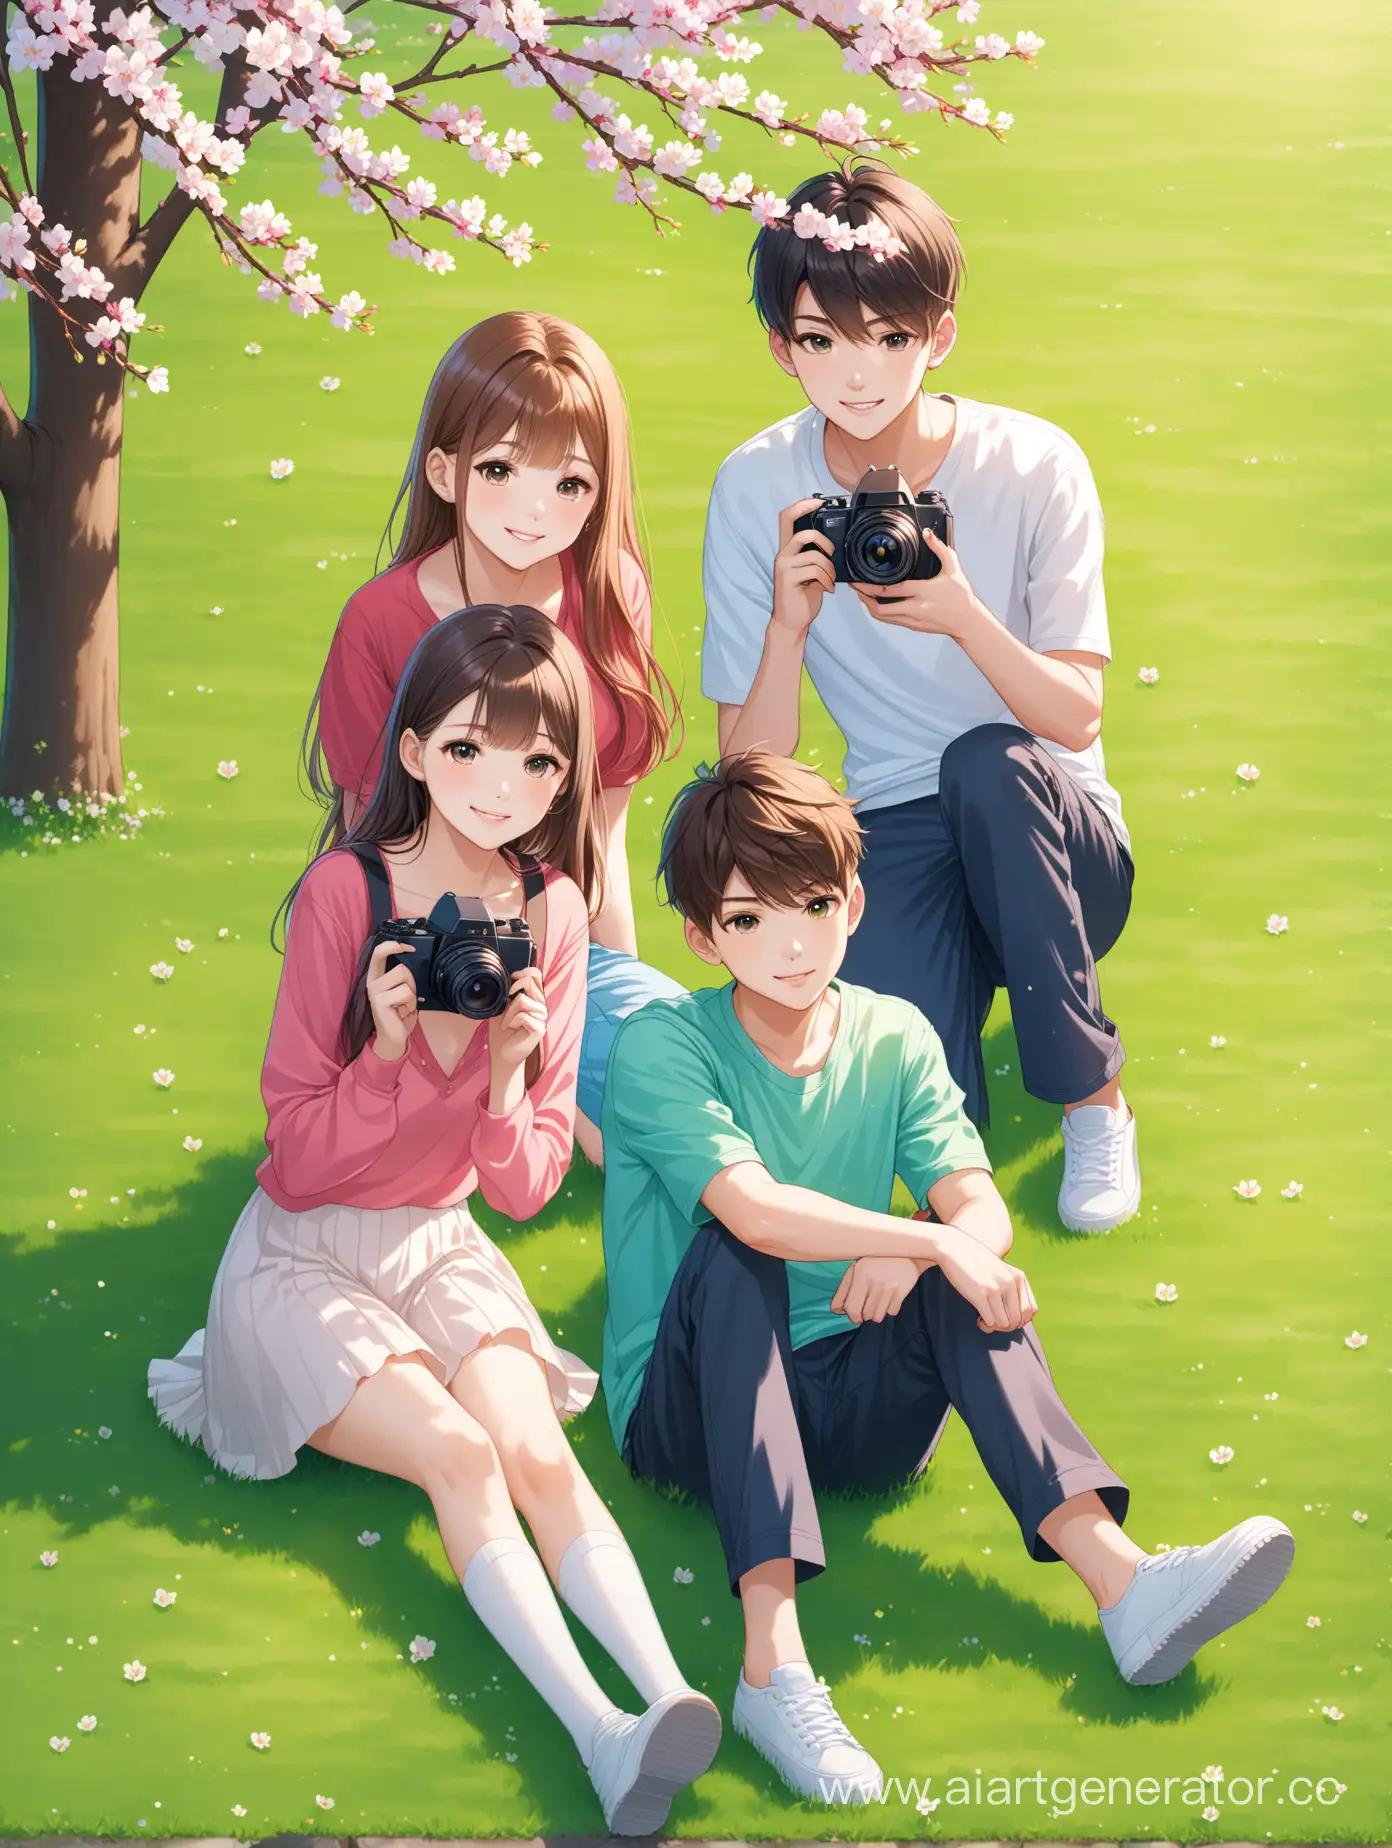 two teen boys and two teen girls are taking pictures on the lawn in spring